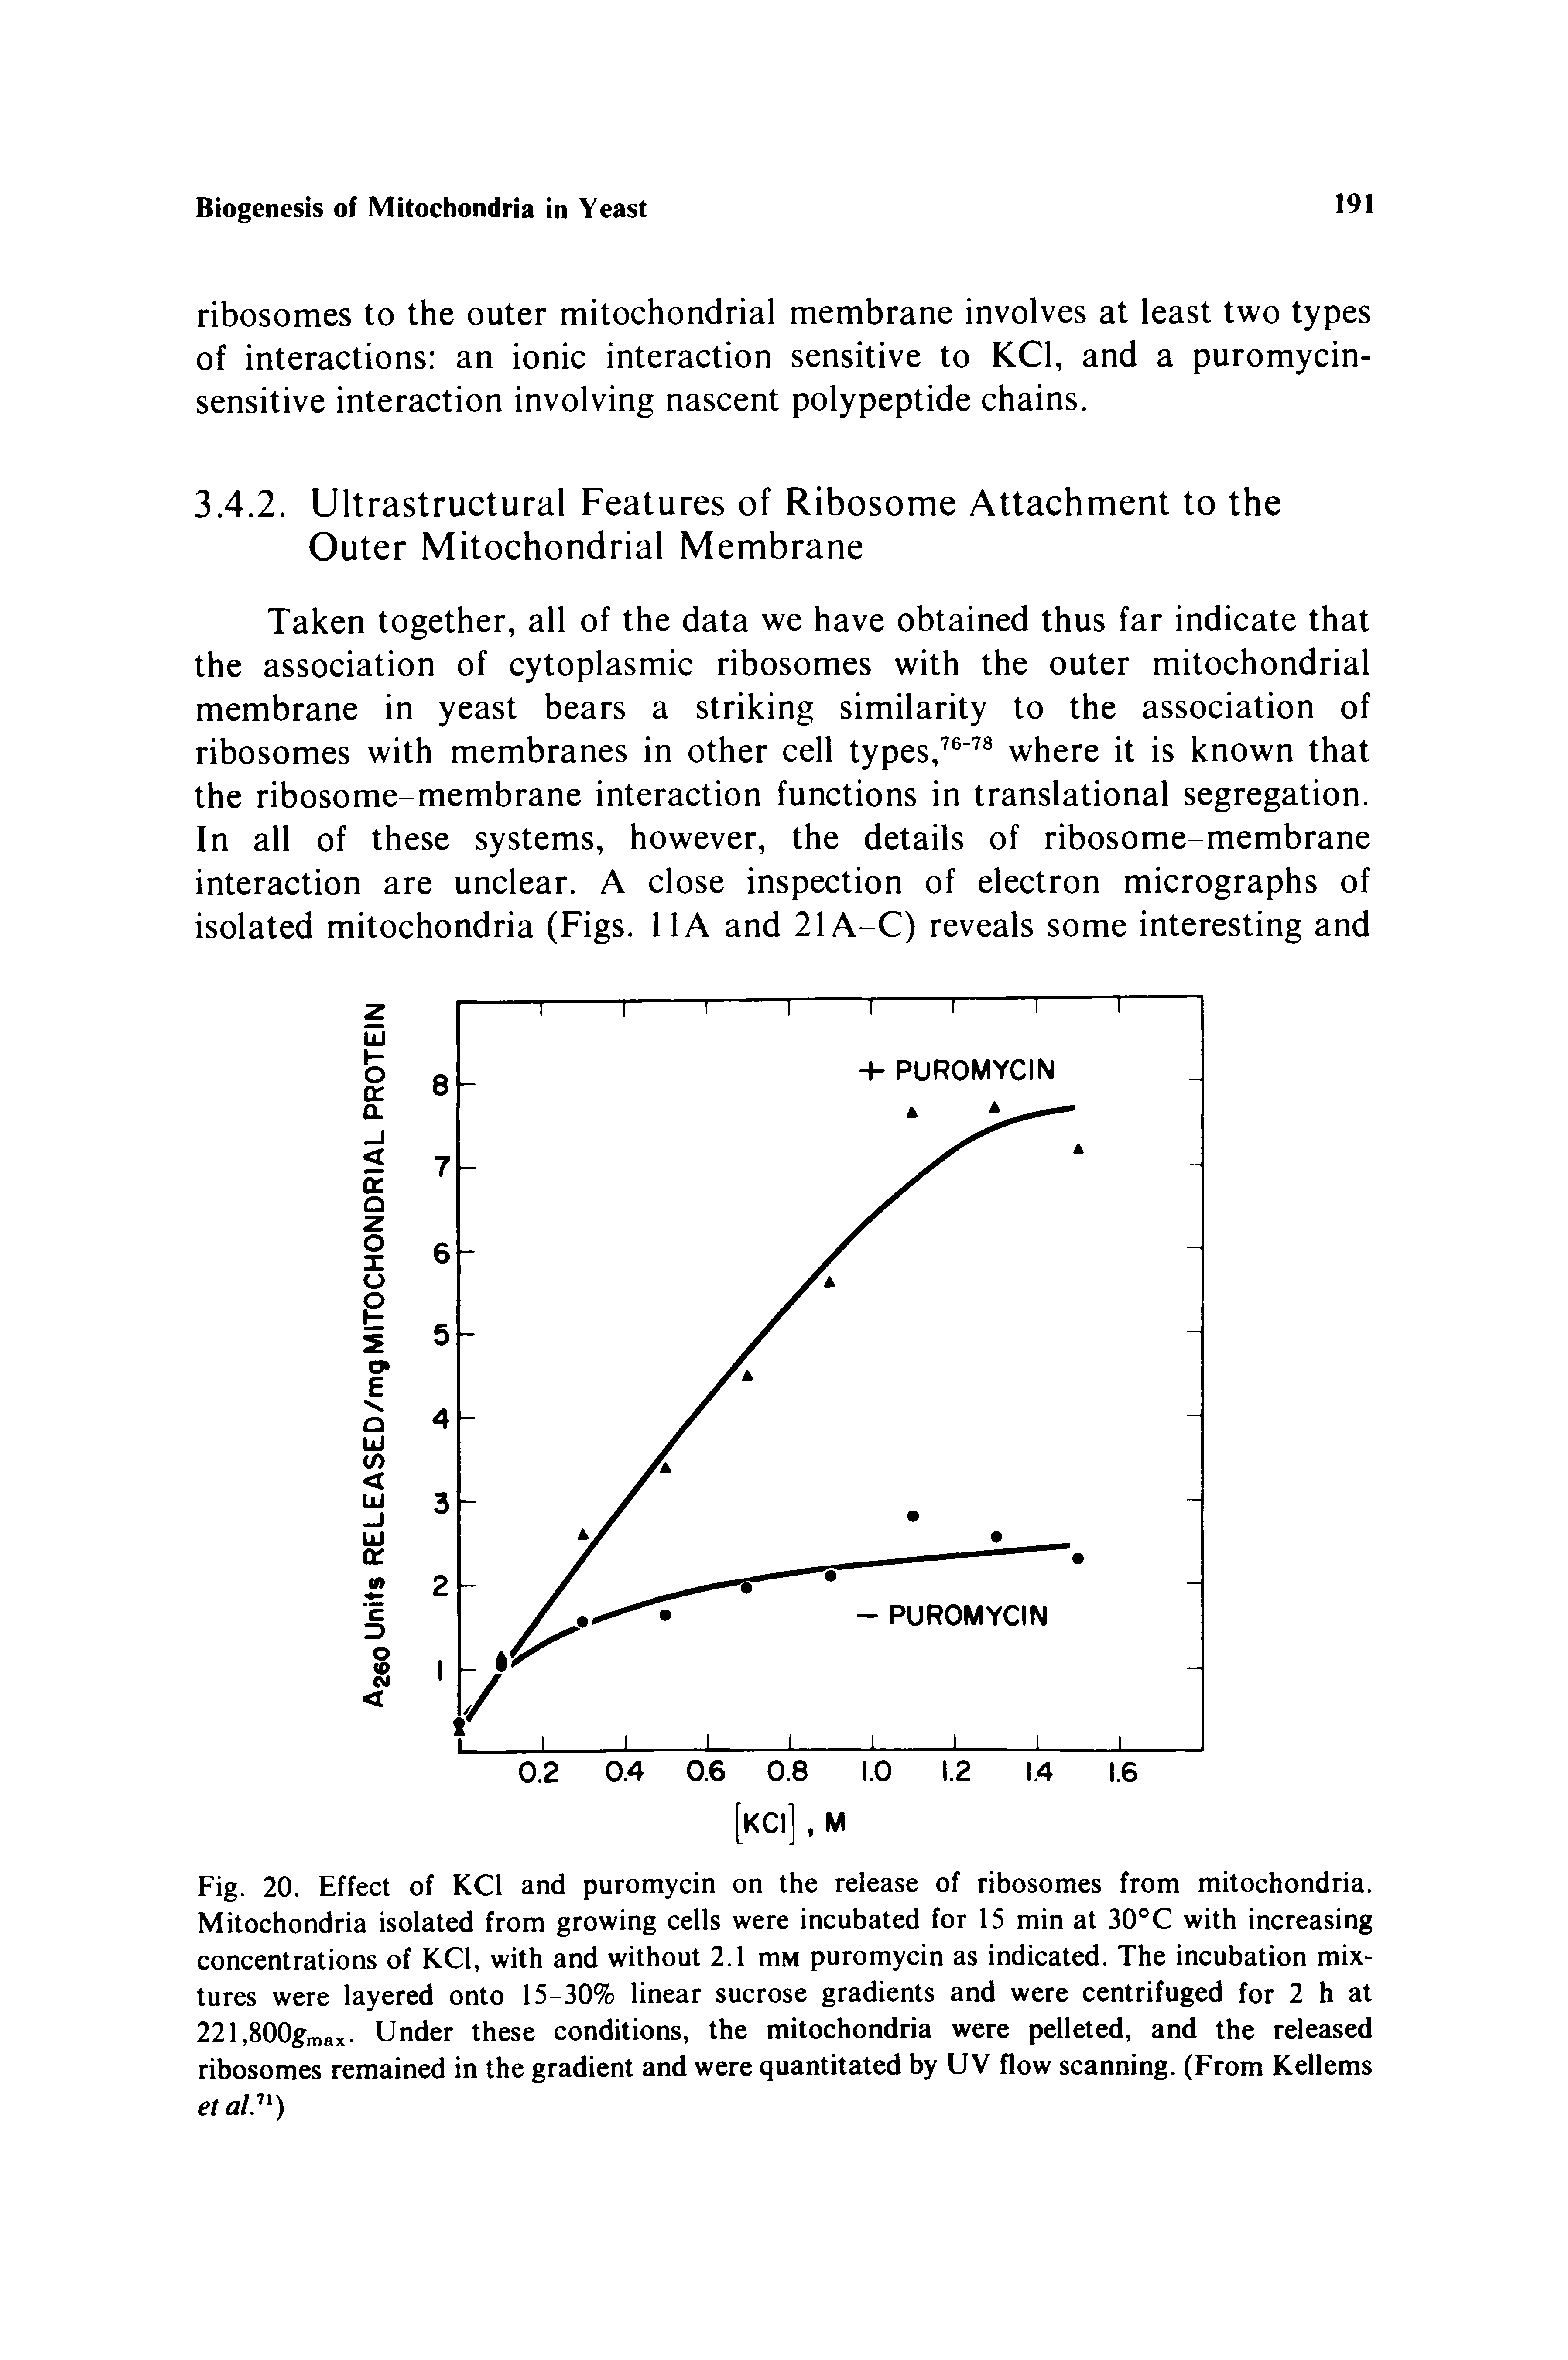 Fig. 20. Effect of KCl and puromycin on the release of ribosomes from mitochondria. Mitochondria isolated from growing cells were incubated for 15 min at 30°C with increasing concentrations of KCl, with and without 2.1 mM puromycin as indicated. The incubation mixtures were layered onto 15-30% linear sucrose gradients and were centrifuged for 2 h at 221,800gniax- Under these conditions, the mitochondria were pelleted, and the released ribosomes remained in the gradient and were quantitated by UV flow scanning. (From Kellems et al )...